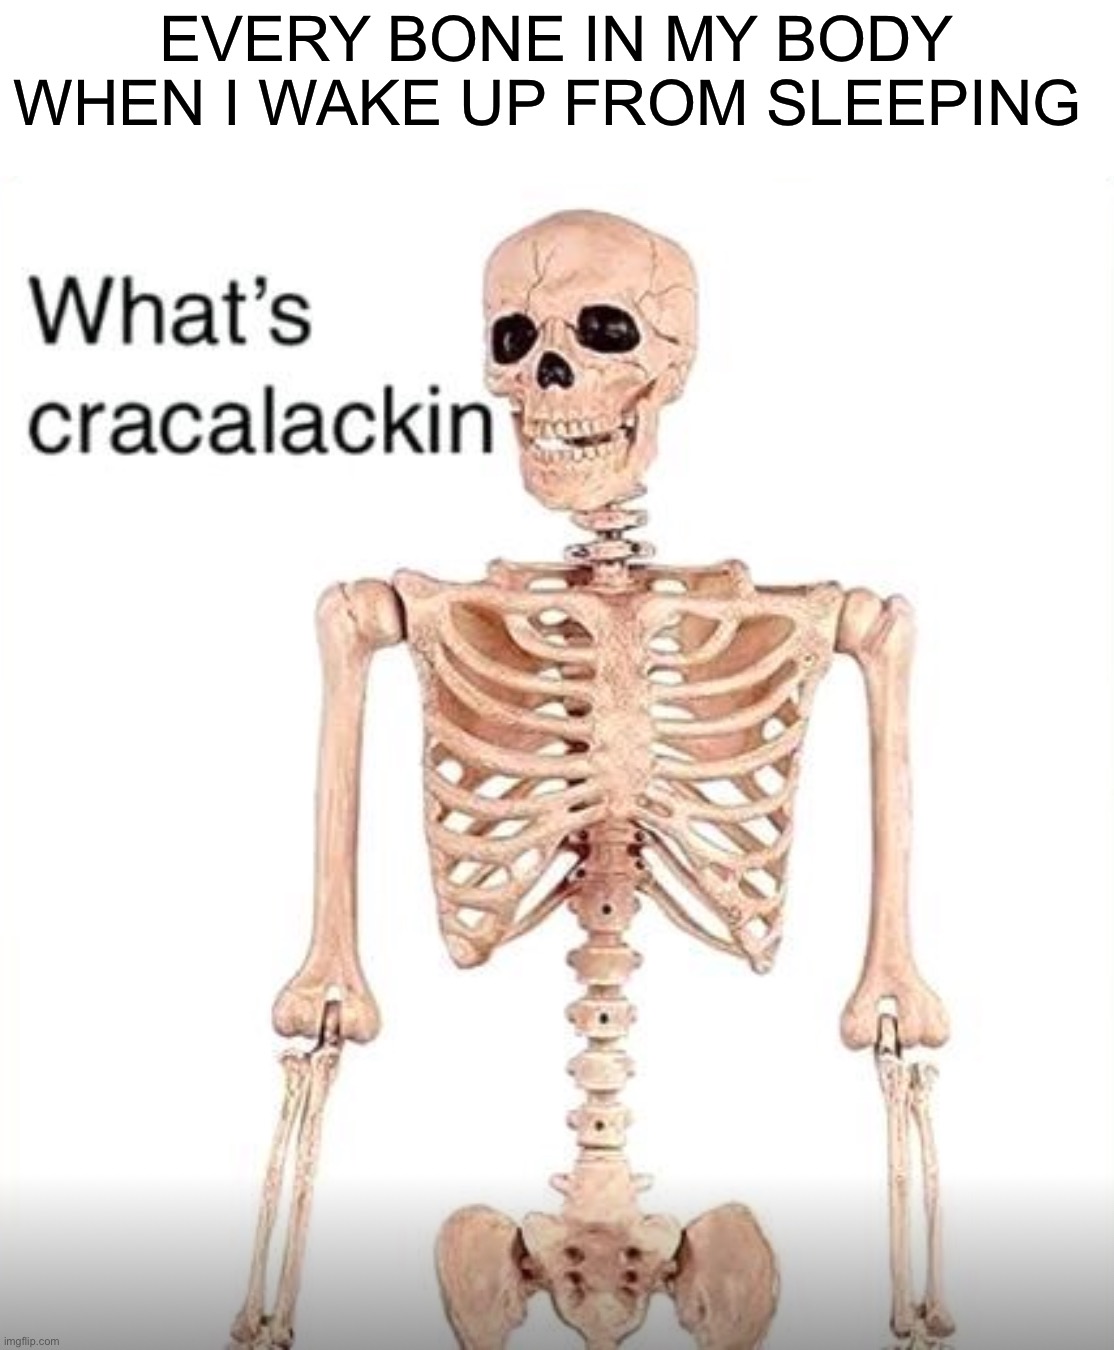 *cracks neck and dies* | EVERY BONE IN MY BODY WHEN I WAKE UP FROM SLEEPING | image tagged in memes,funny,crack,pain,sleep,wake up | made w/ Imgflip meme maker